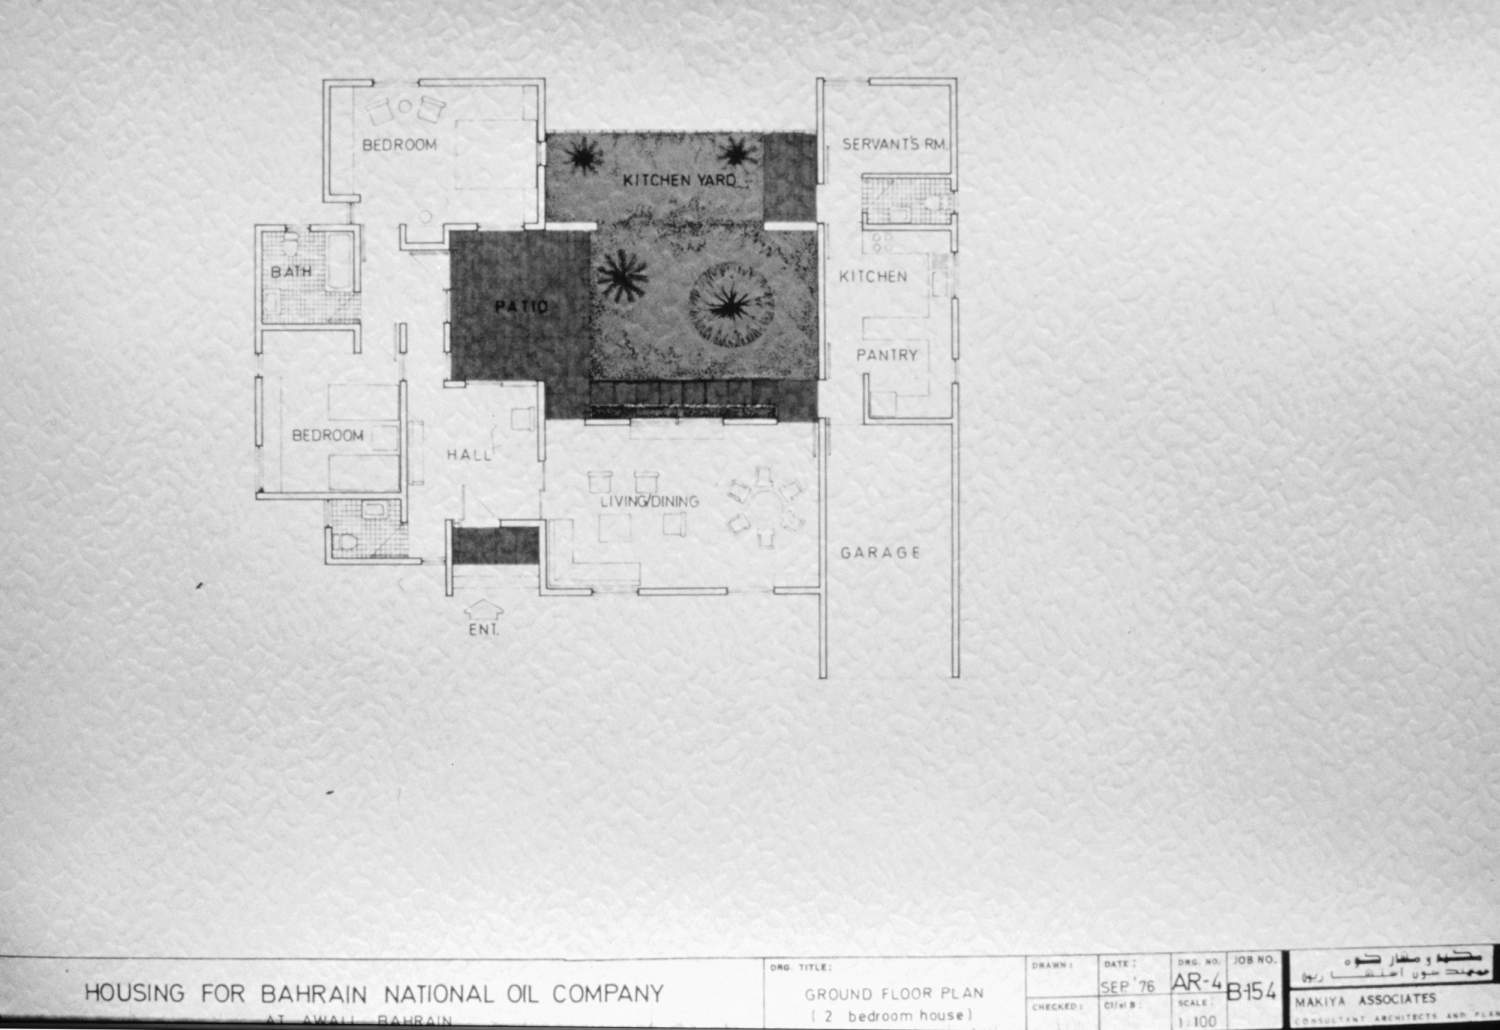 <p>Floor plan for a 2 bedroom house.</p>